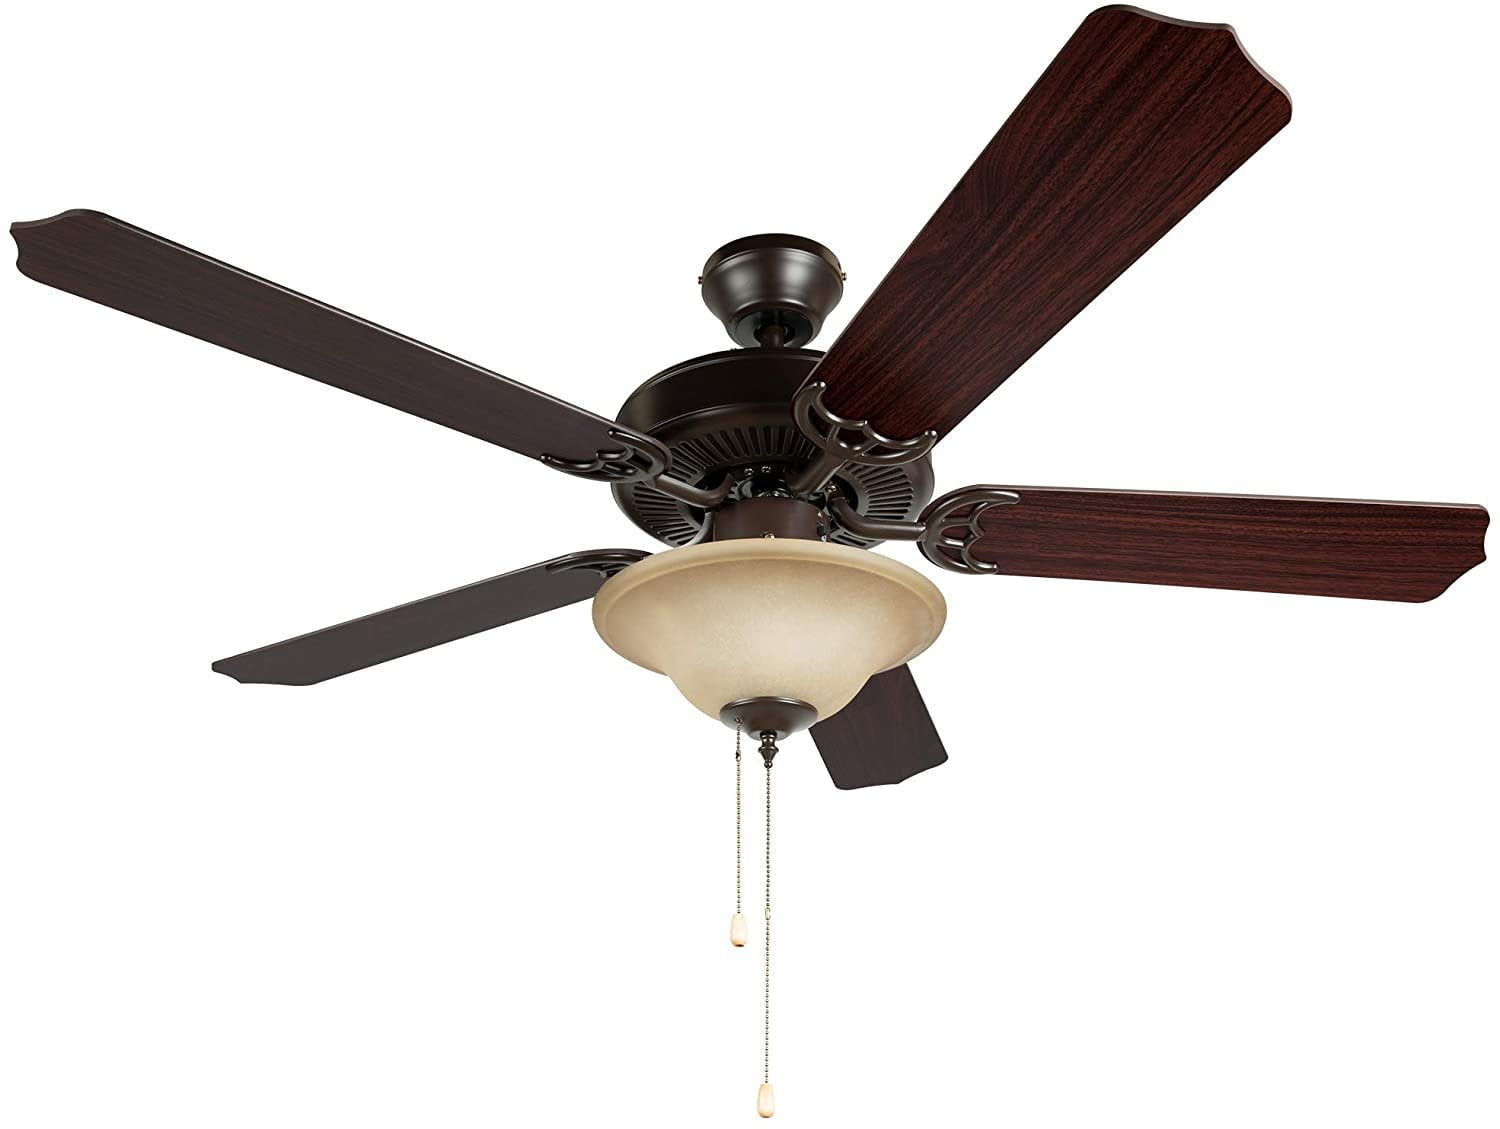 Hyperikon 52 Inch Ceiling Fan 60w, Can A Remote Control Be Added To Ceiling Fan